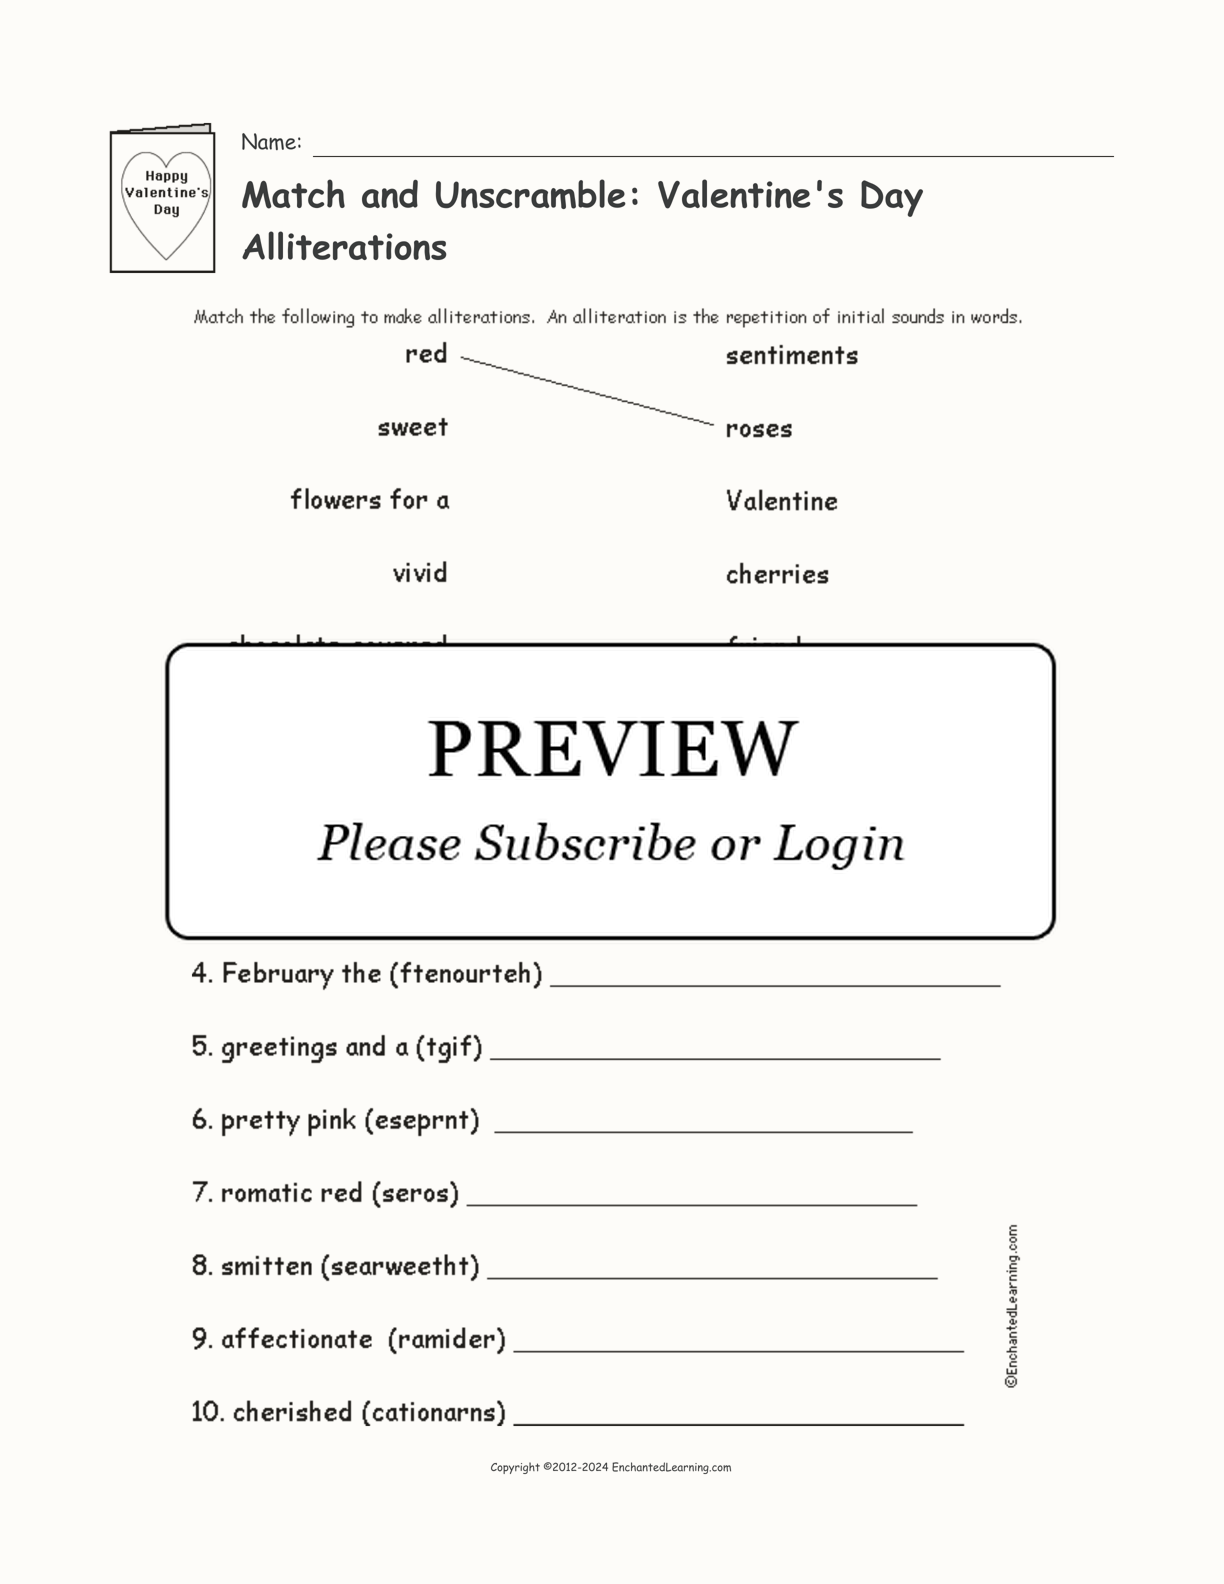 Match and Unscramble: Valentine's Day Alliterations interactive worksheet page 1